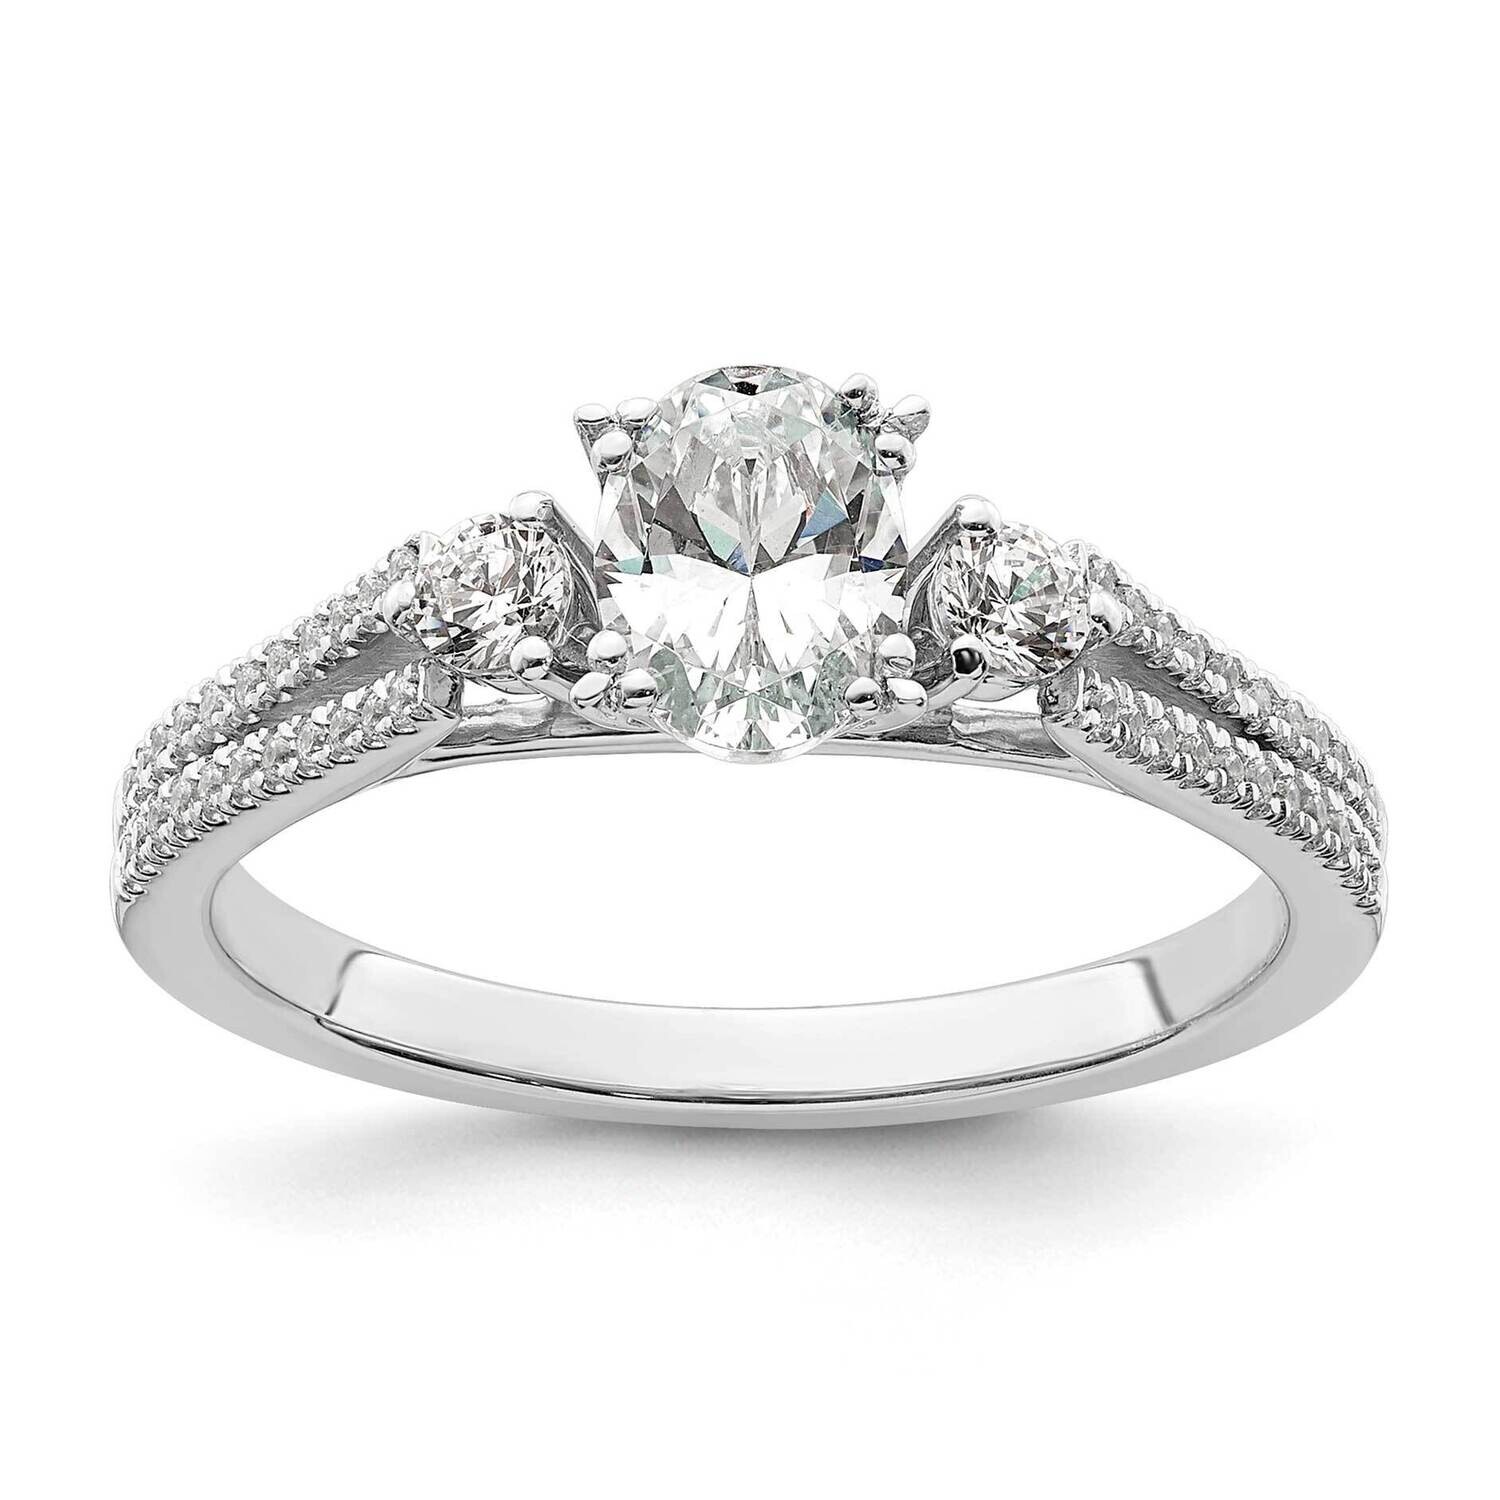 3 Stone 1/2Ct Oval Semi-Mount Including 2-2.6mm Side Stones Diamond Engagement Ring 14k White Gold RM7841E-050-WAA